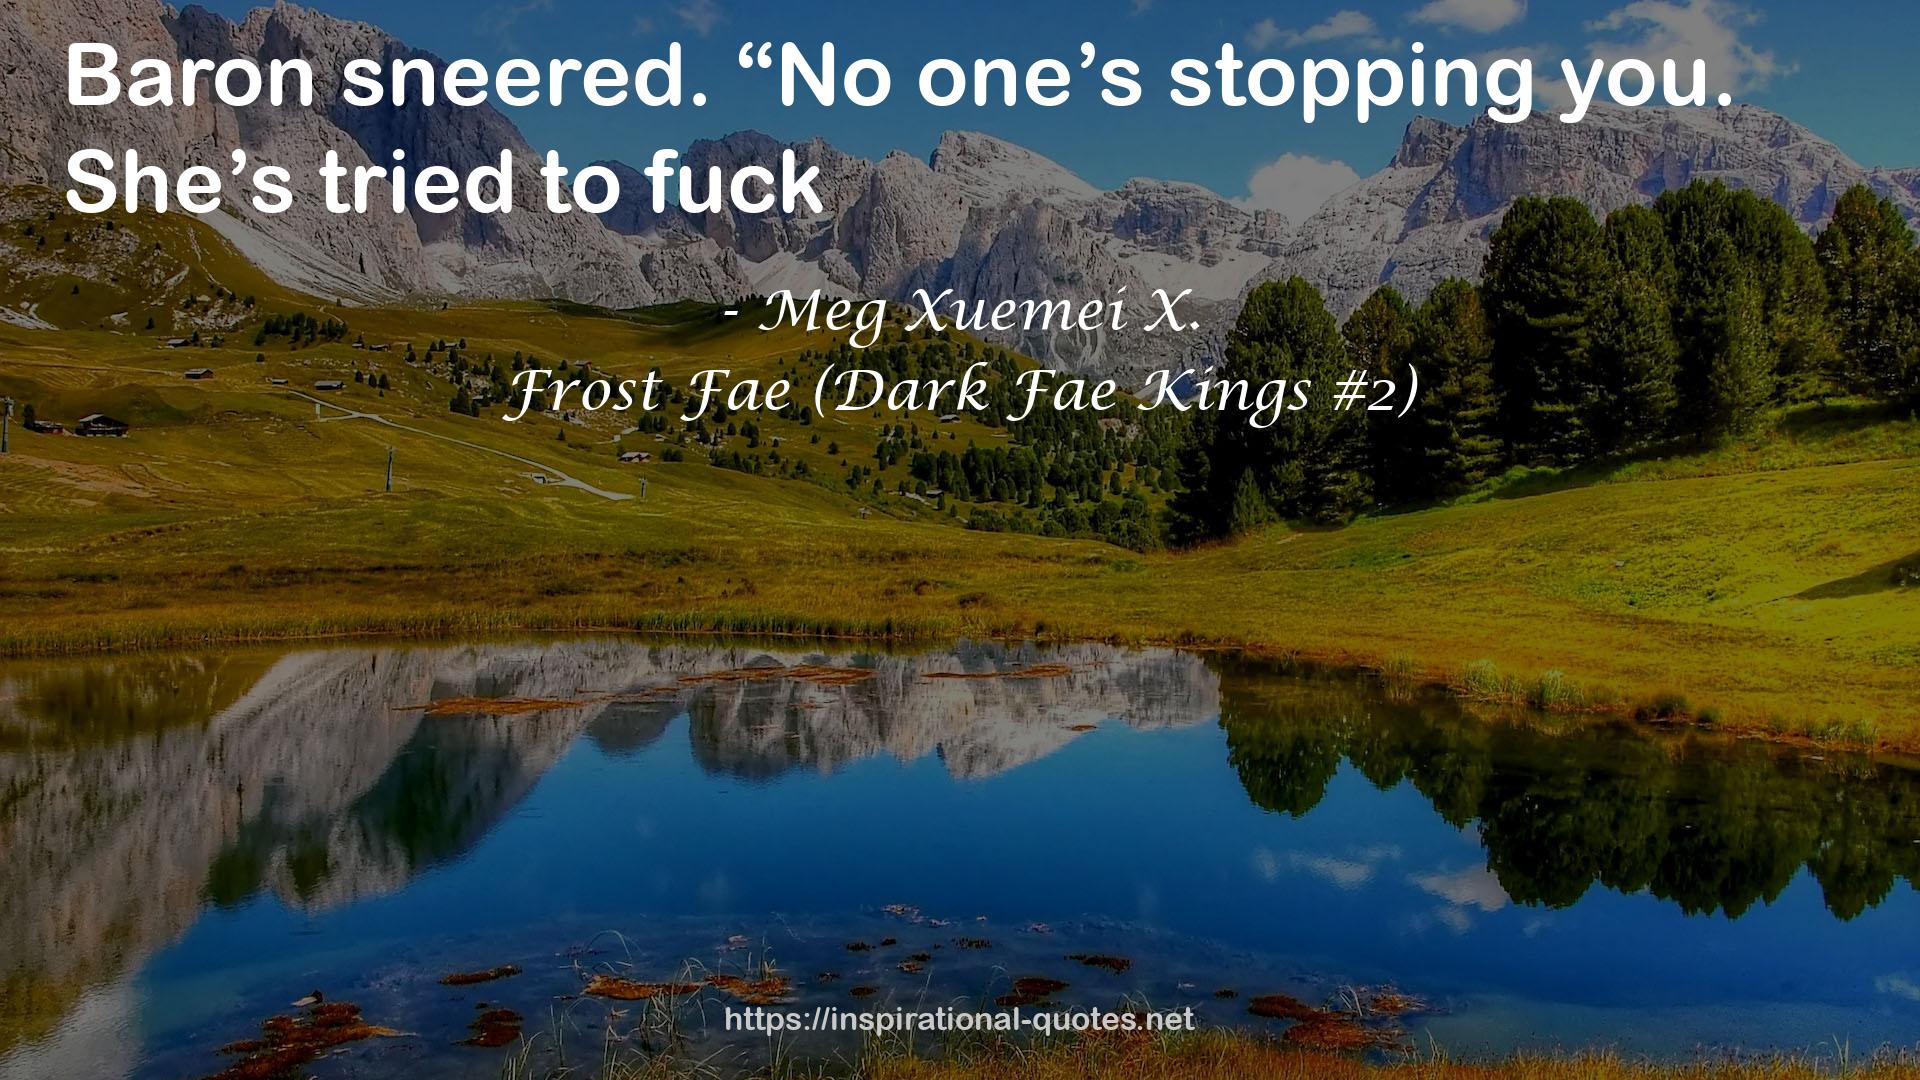 Frost Fae (Dark Fae Kings #2) QUOTES